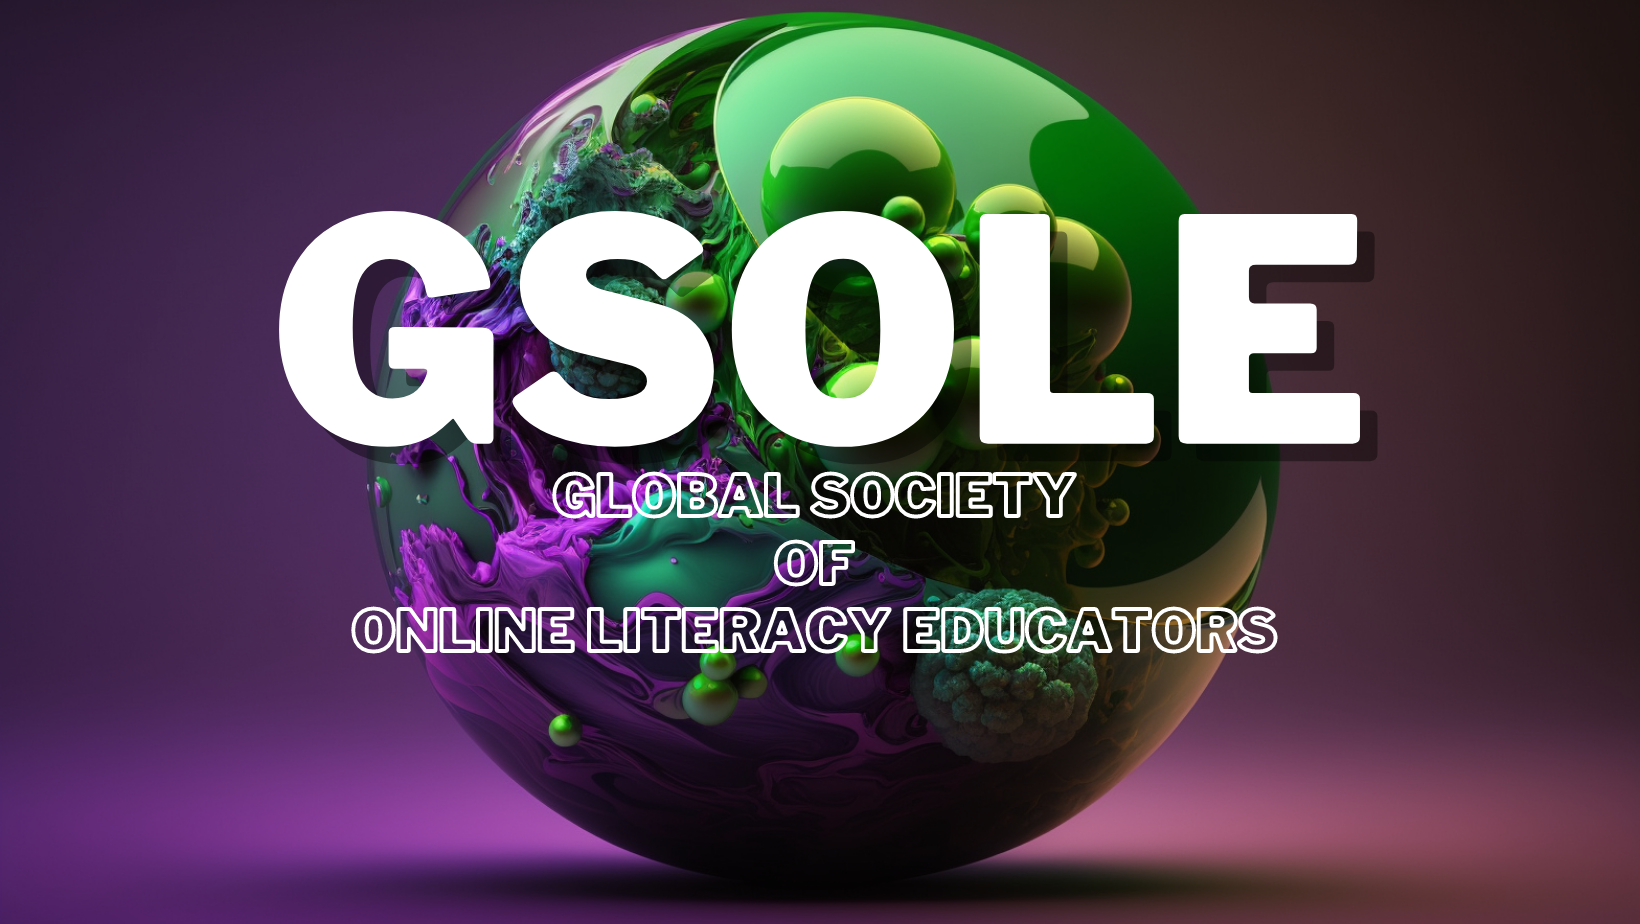 Image of a swirling, green and purple digital globe and the name "GSOLE" across the top, as well as the full title "Global Society of Online Literacy Educators"